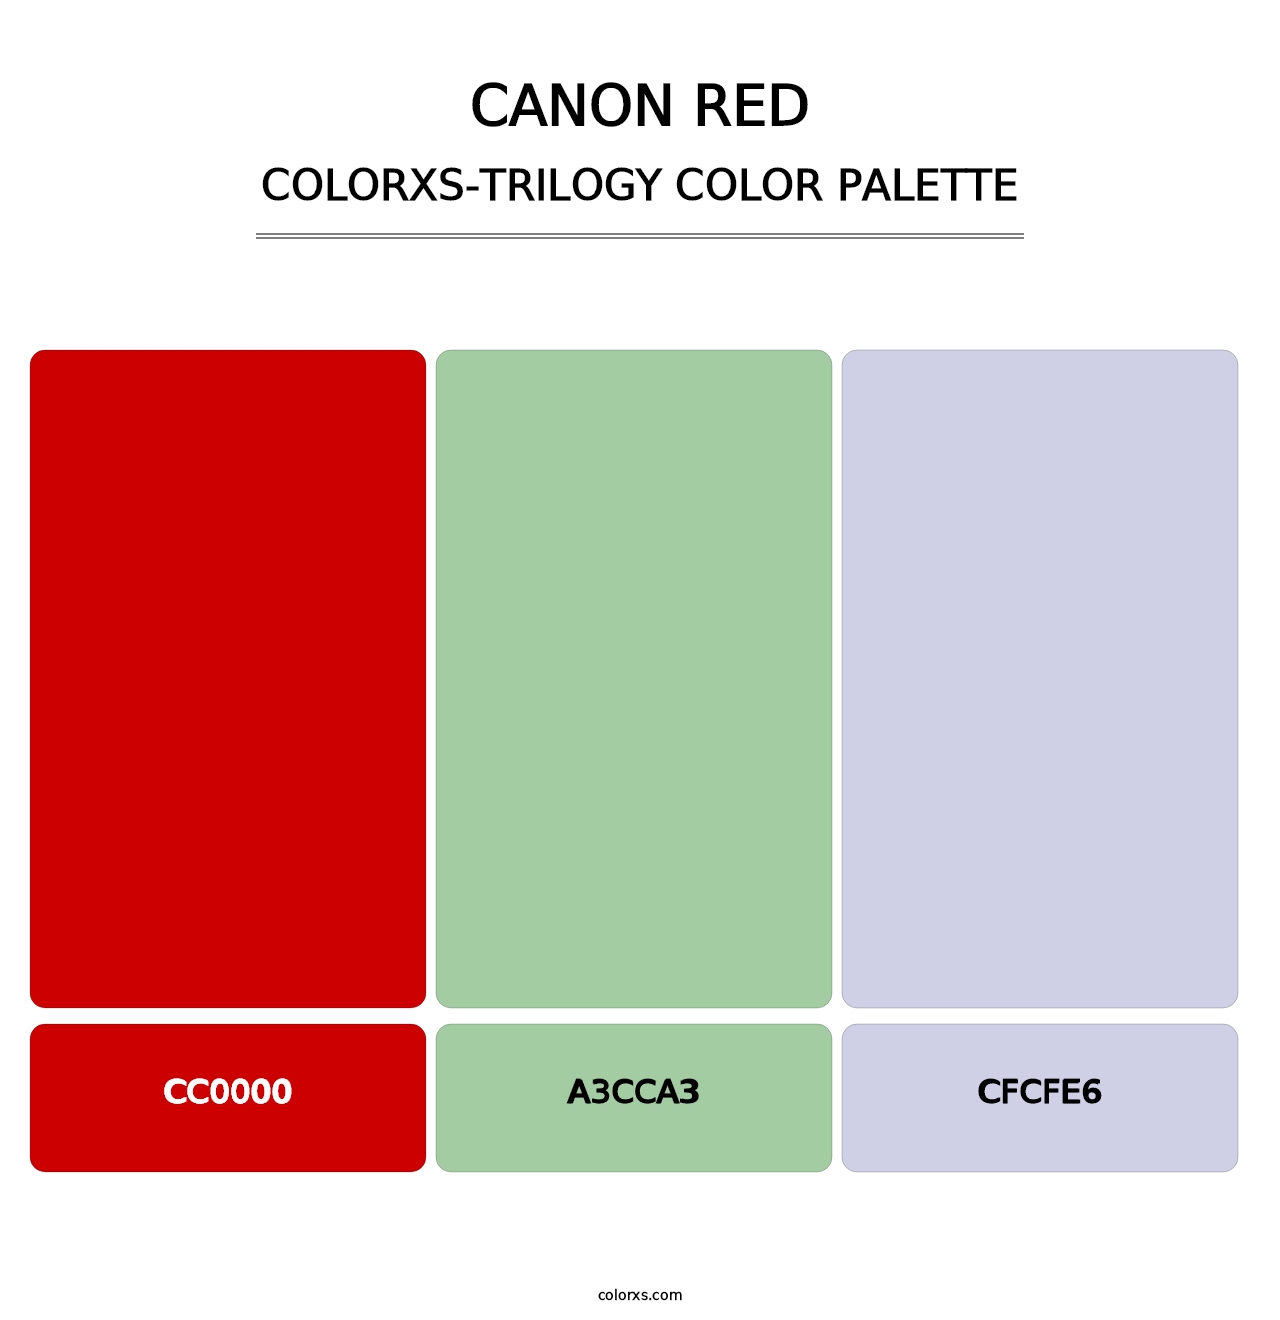 Canon Red - Colorxs Trilogy Palette